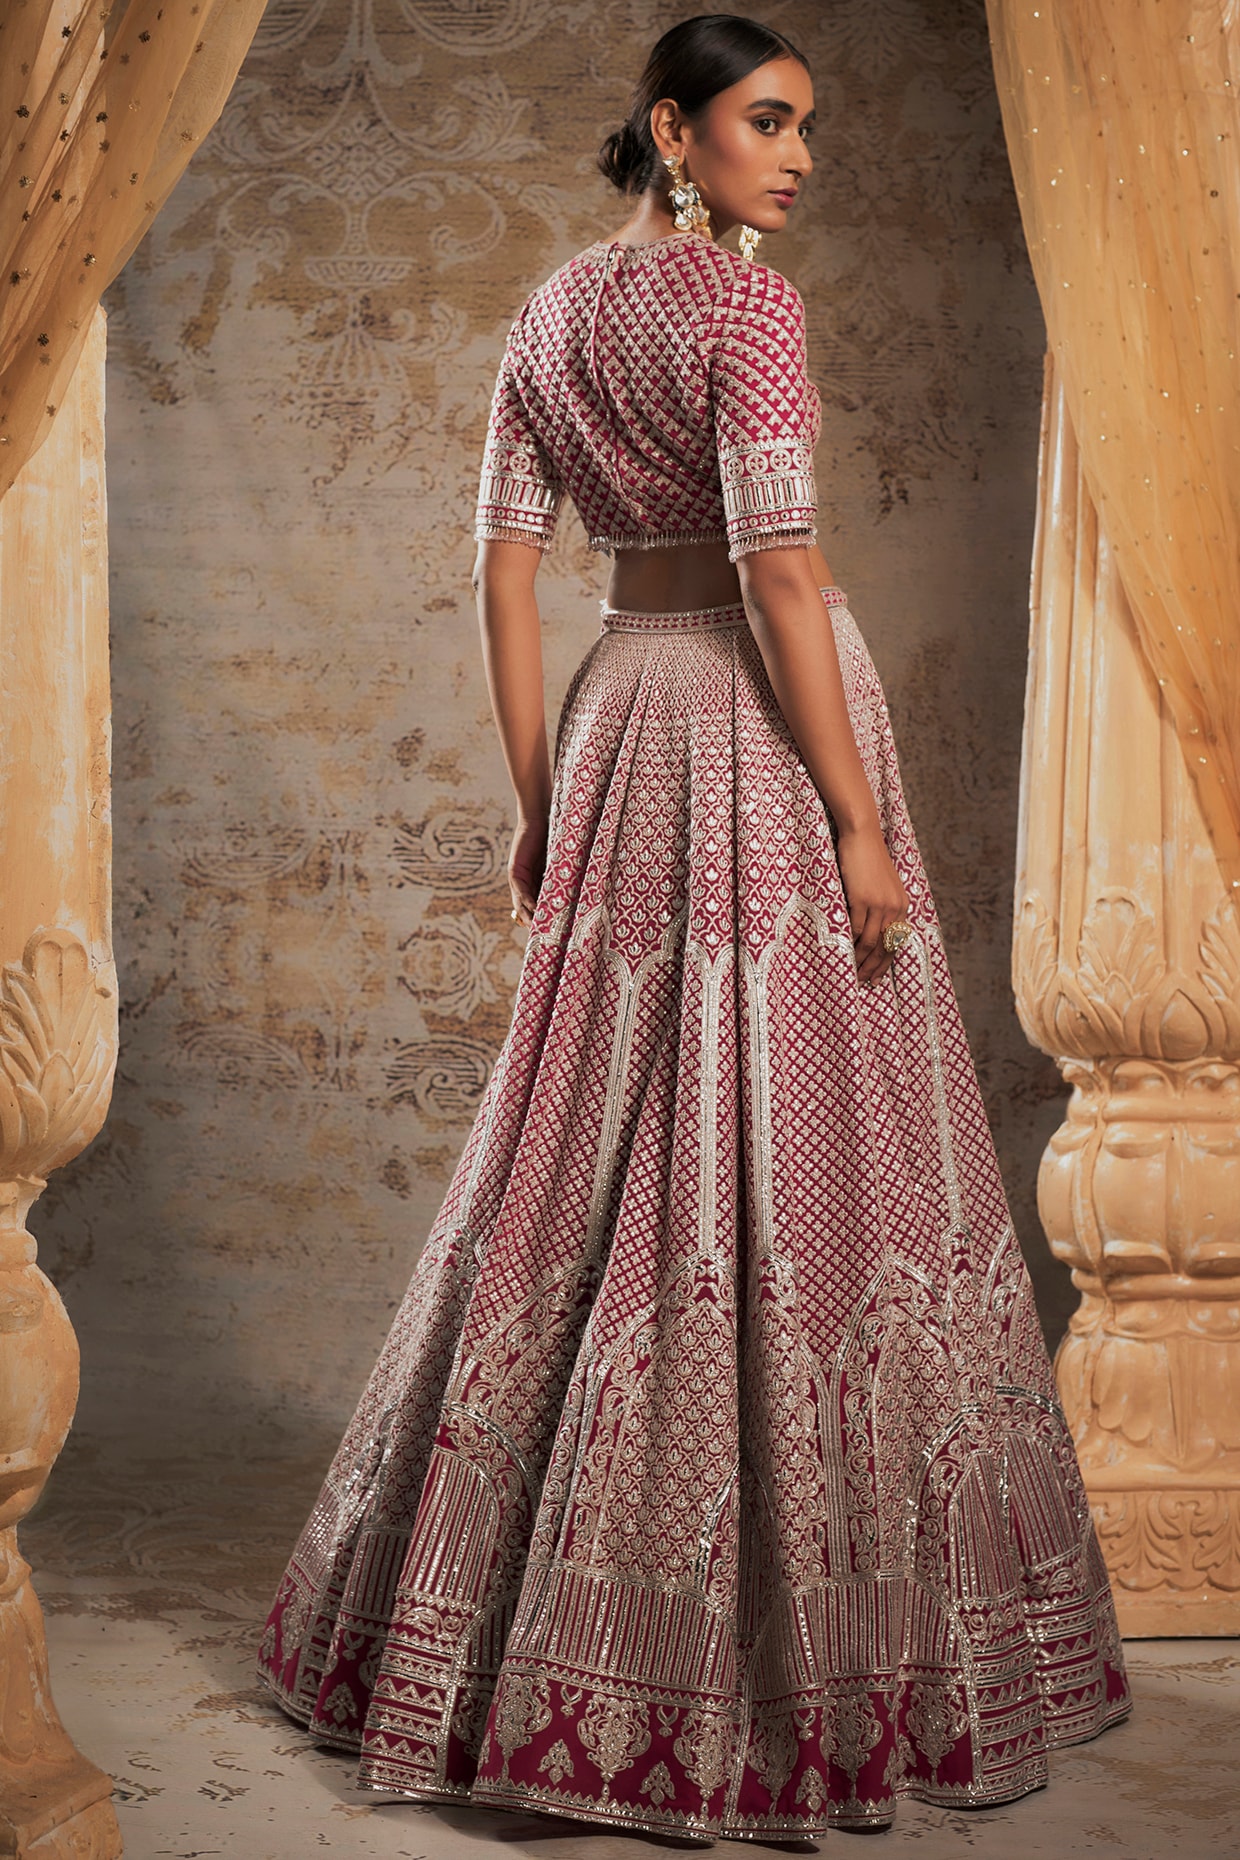 Upgrade Your Style with 71 Lehenga Blouses